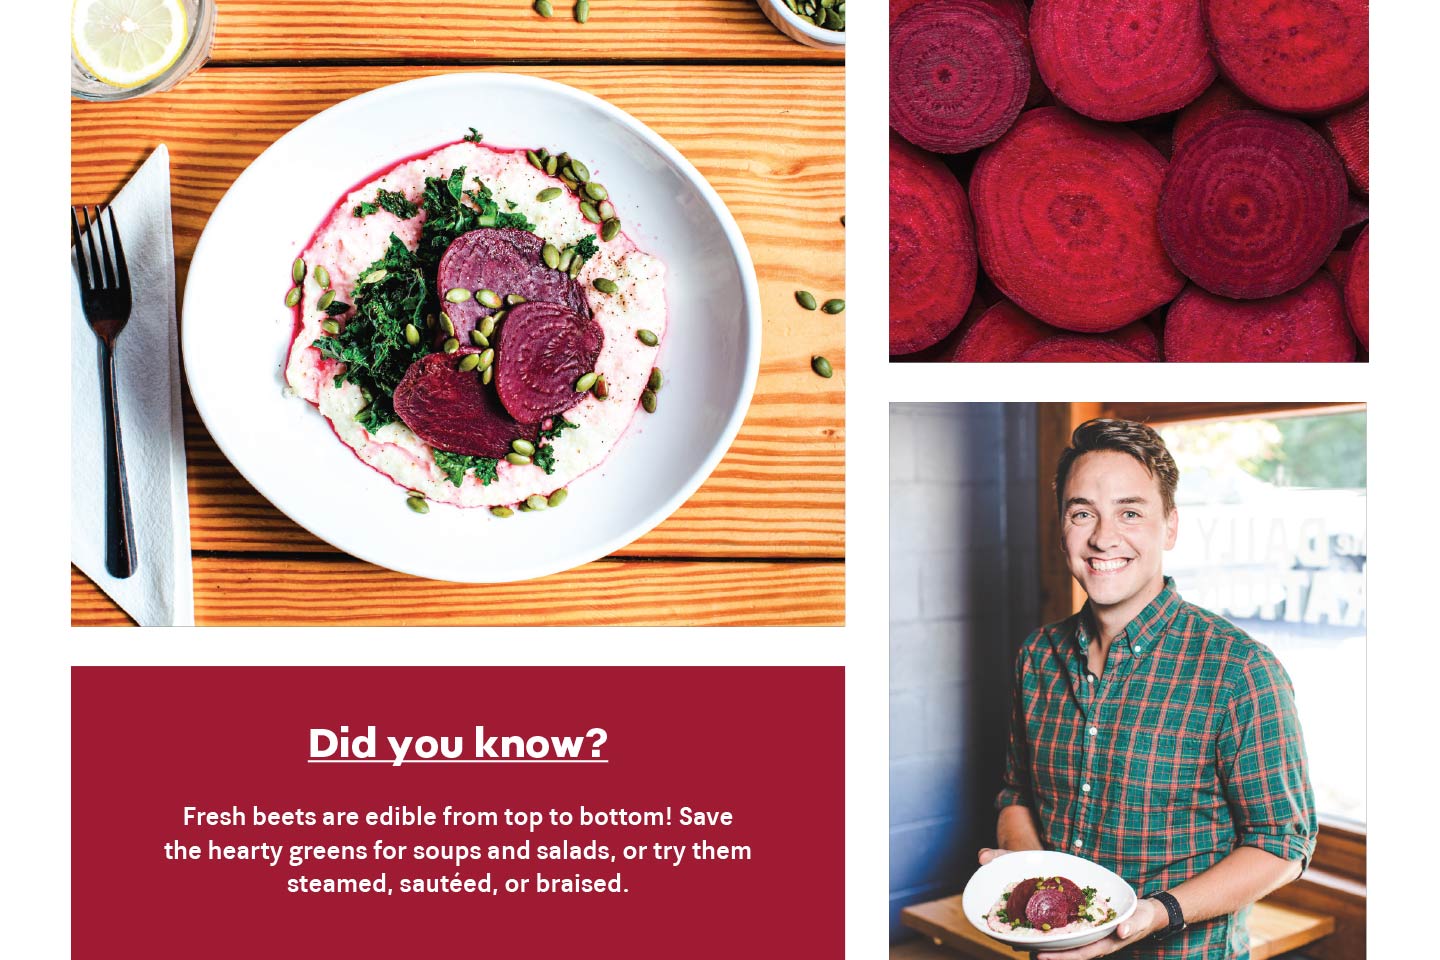 The Daily Ration's "Drop the Beet" Bowl by Chef Jason Bowers and facts about beets